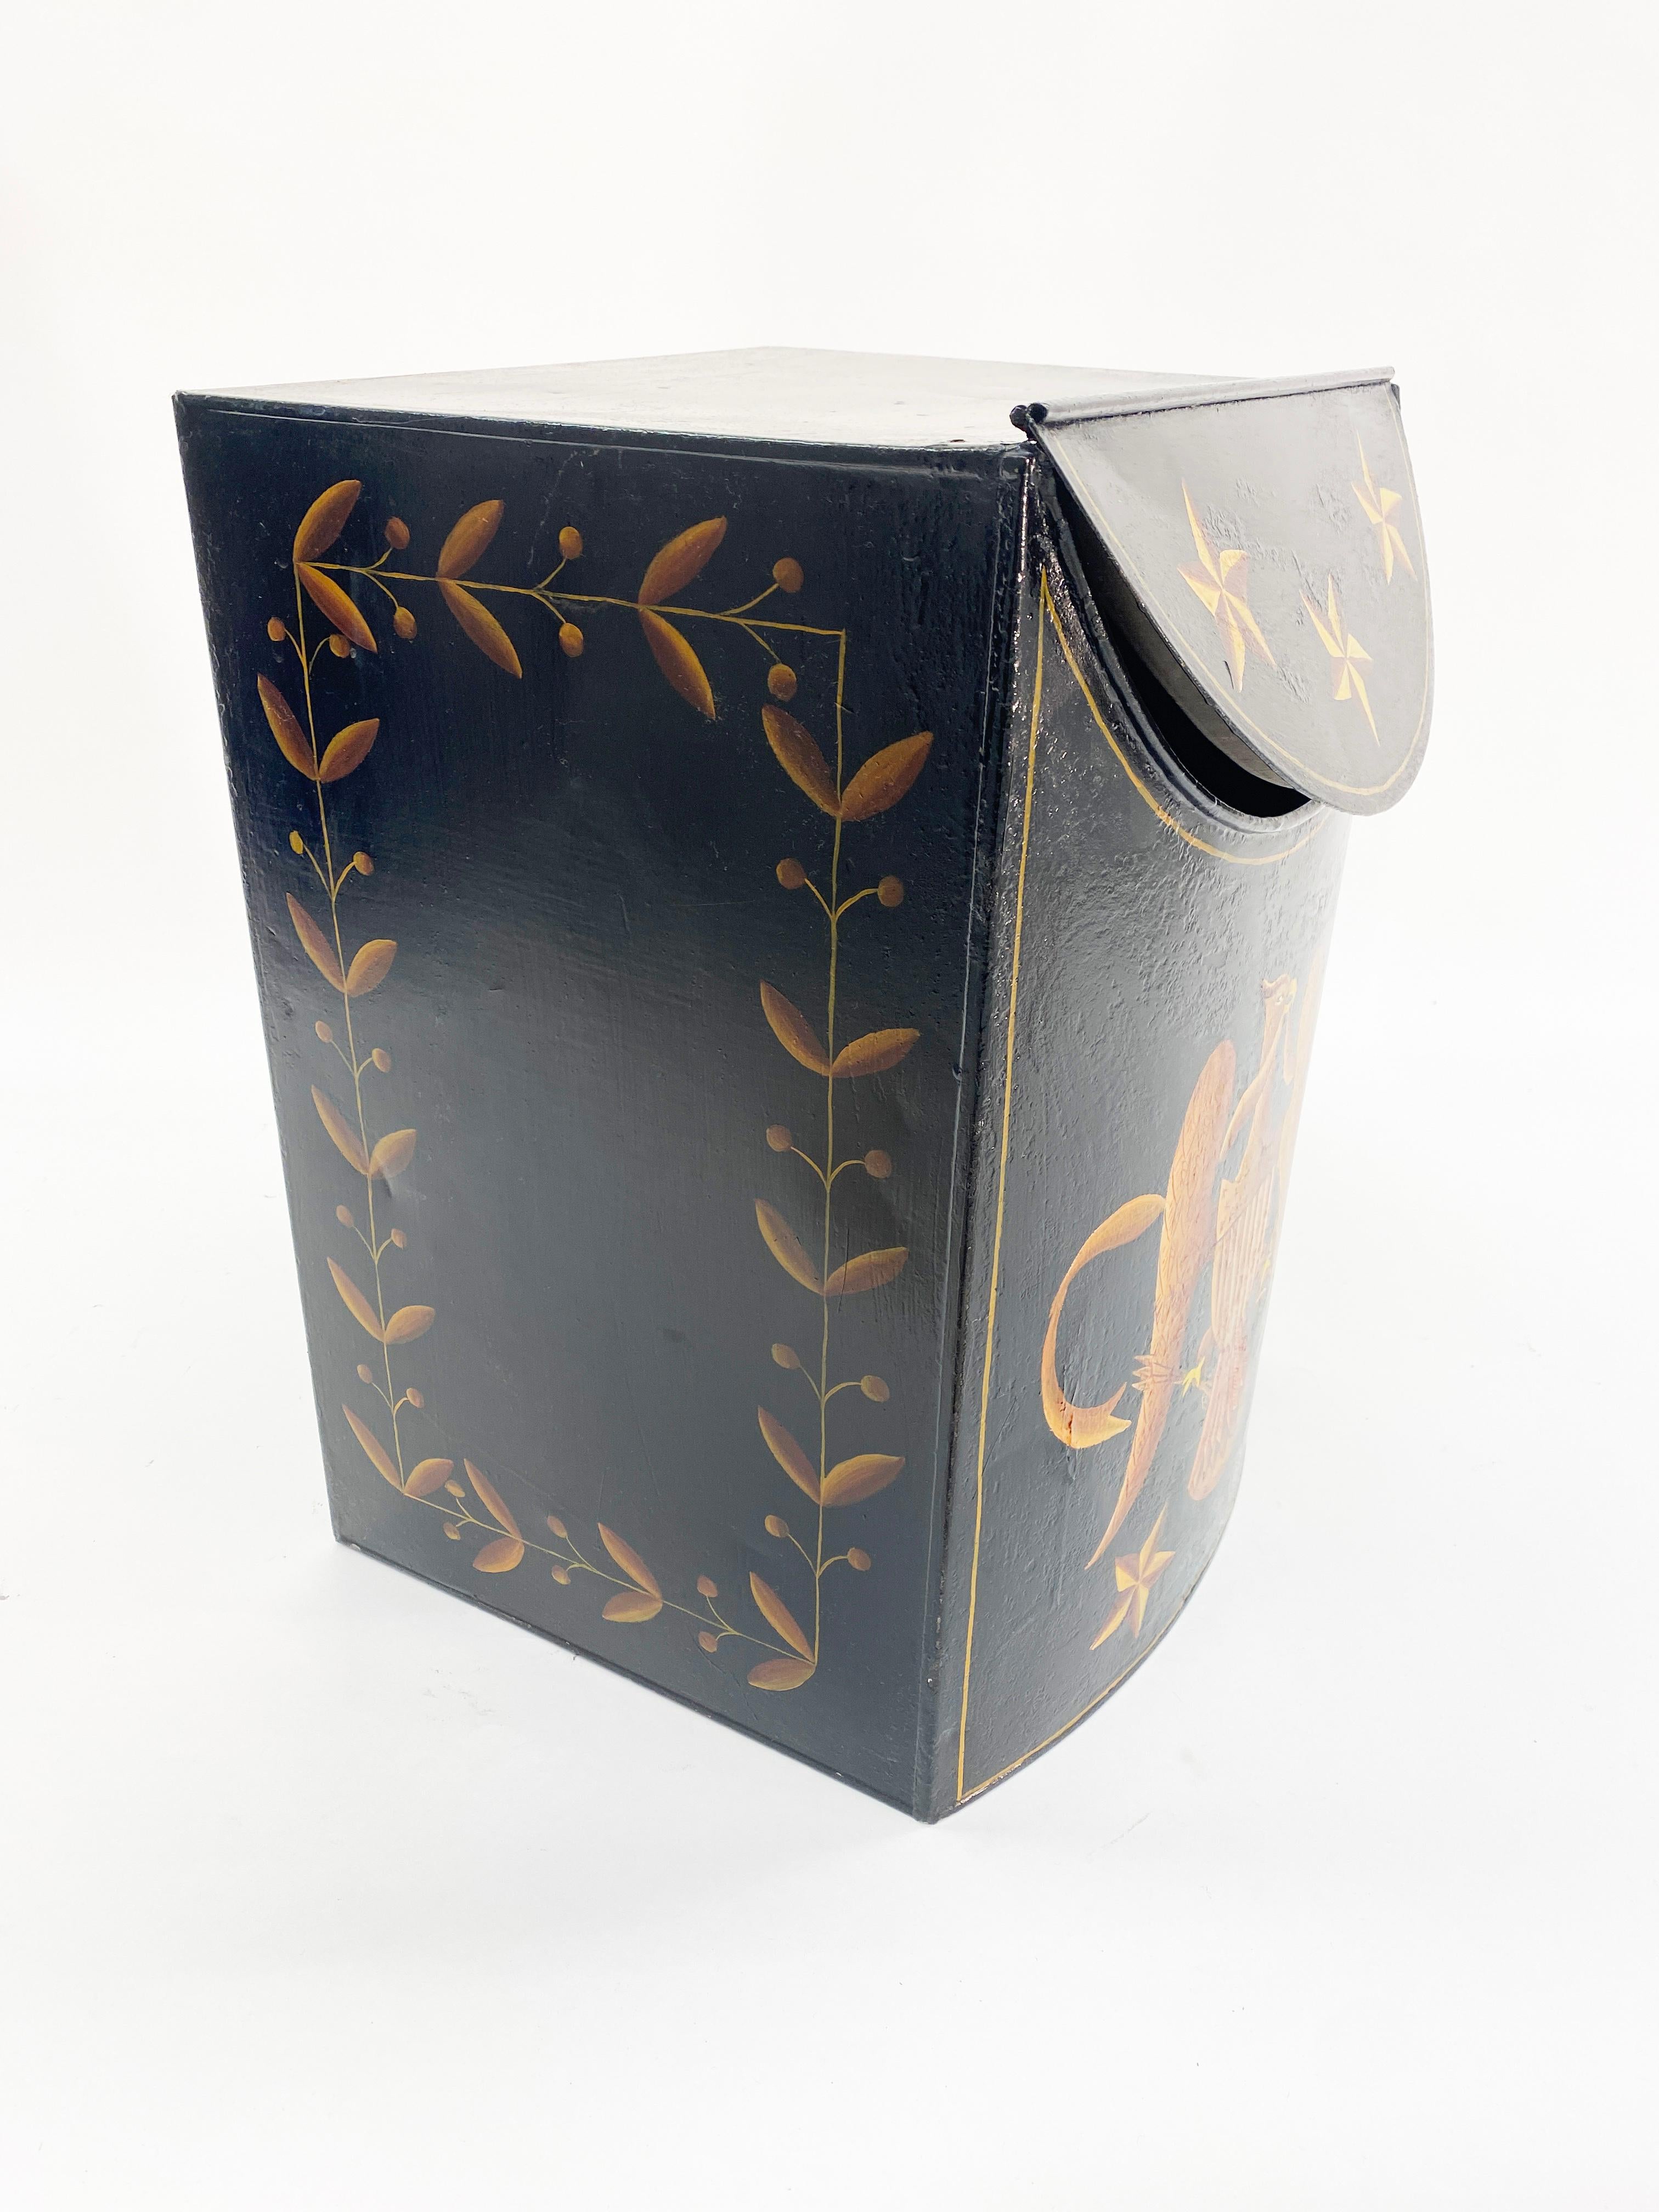 A handsome Federal style hand painted tole tinder wood box. Ebonized lacquer paint overpainted with a federal eagle holding olive branches and arrows and crested with a Union shield. The Eagle is surrounded with nautical stars above and below. The